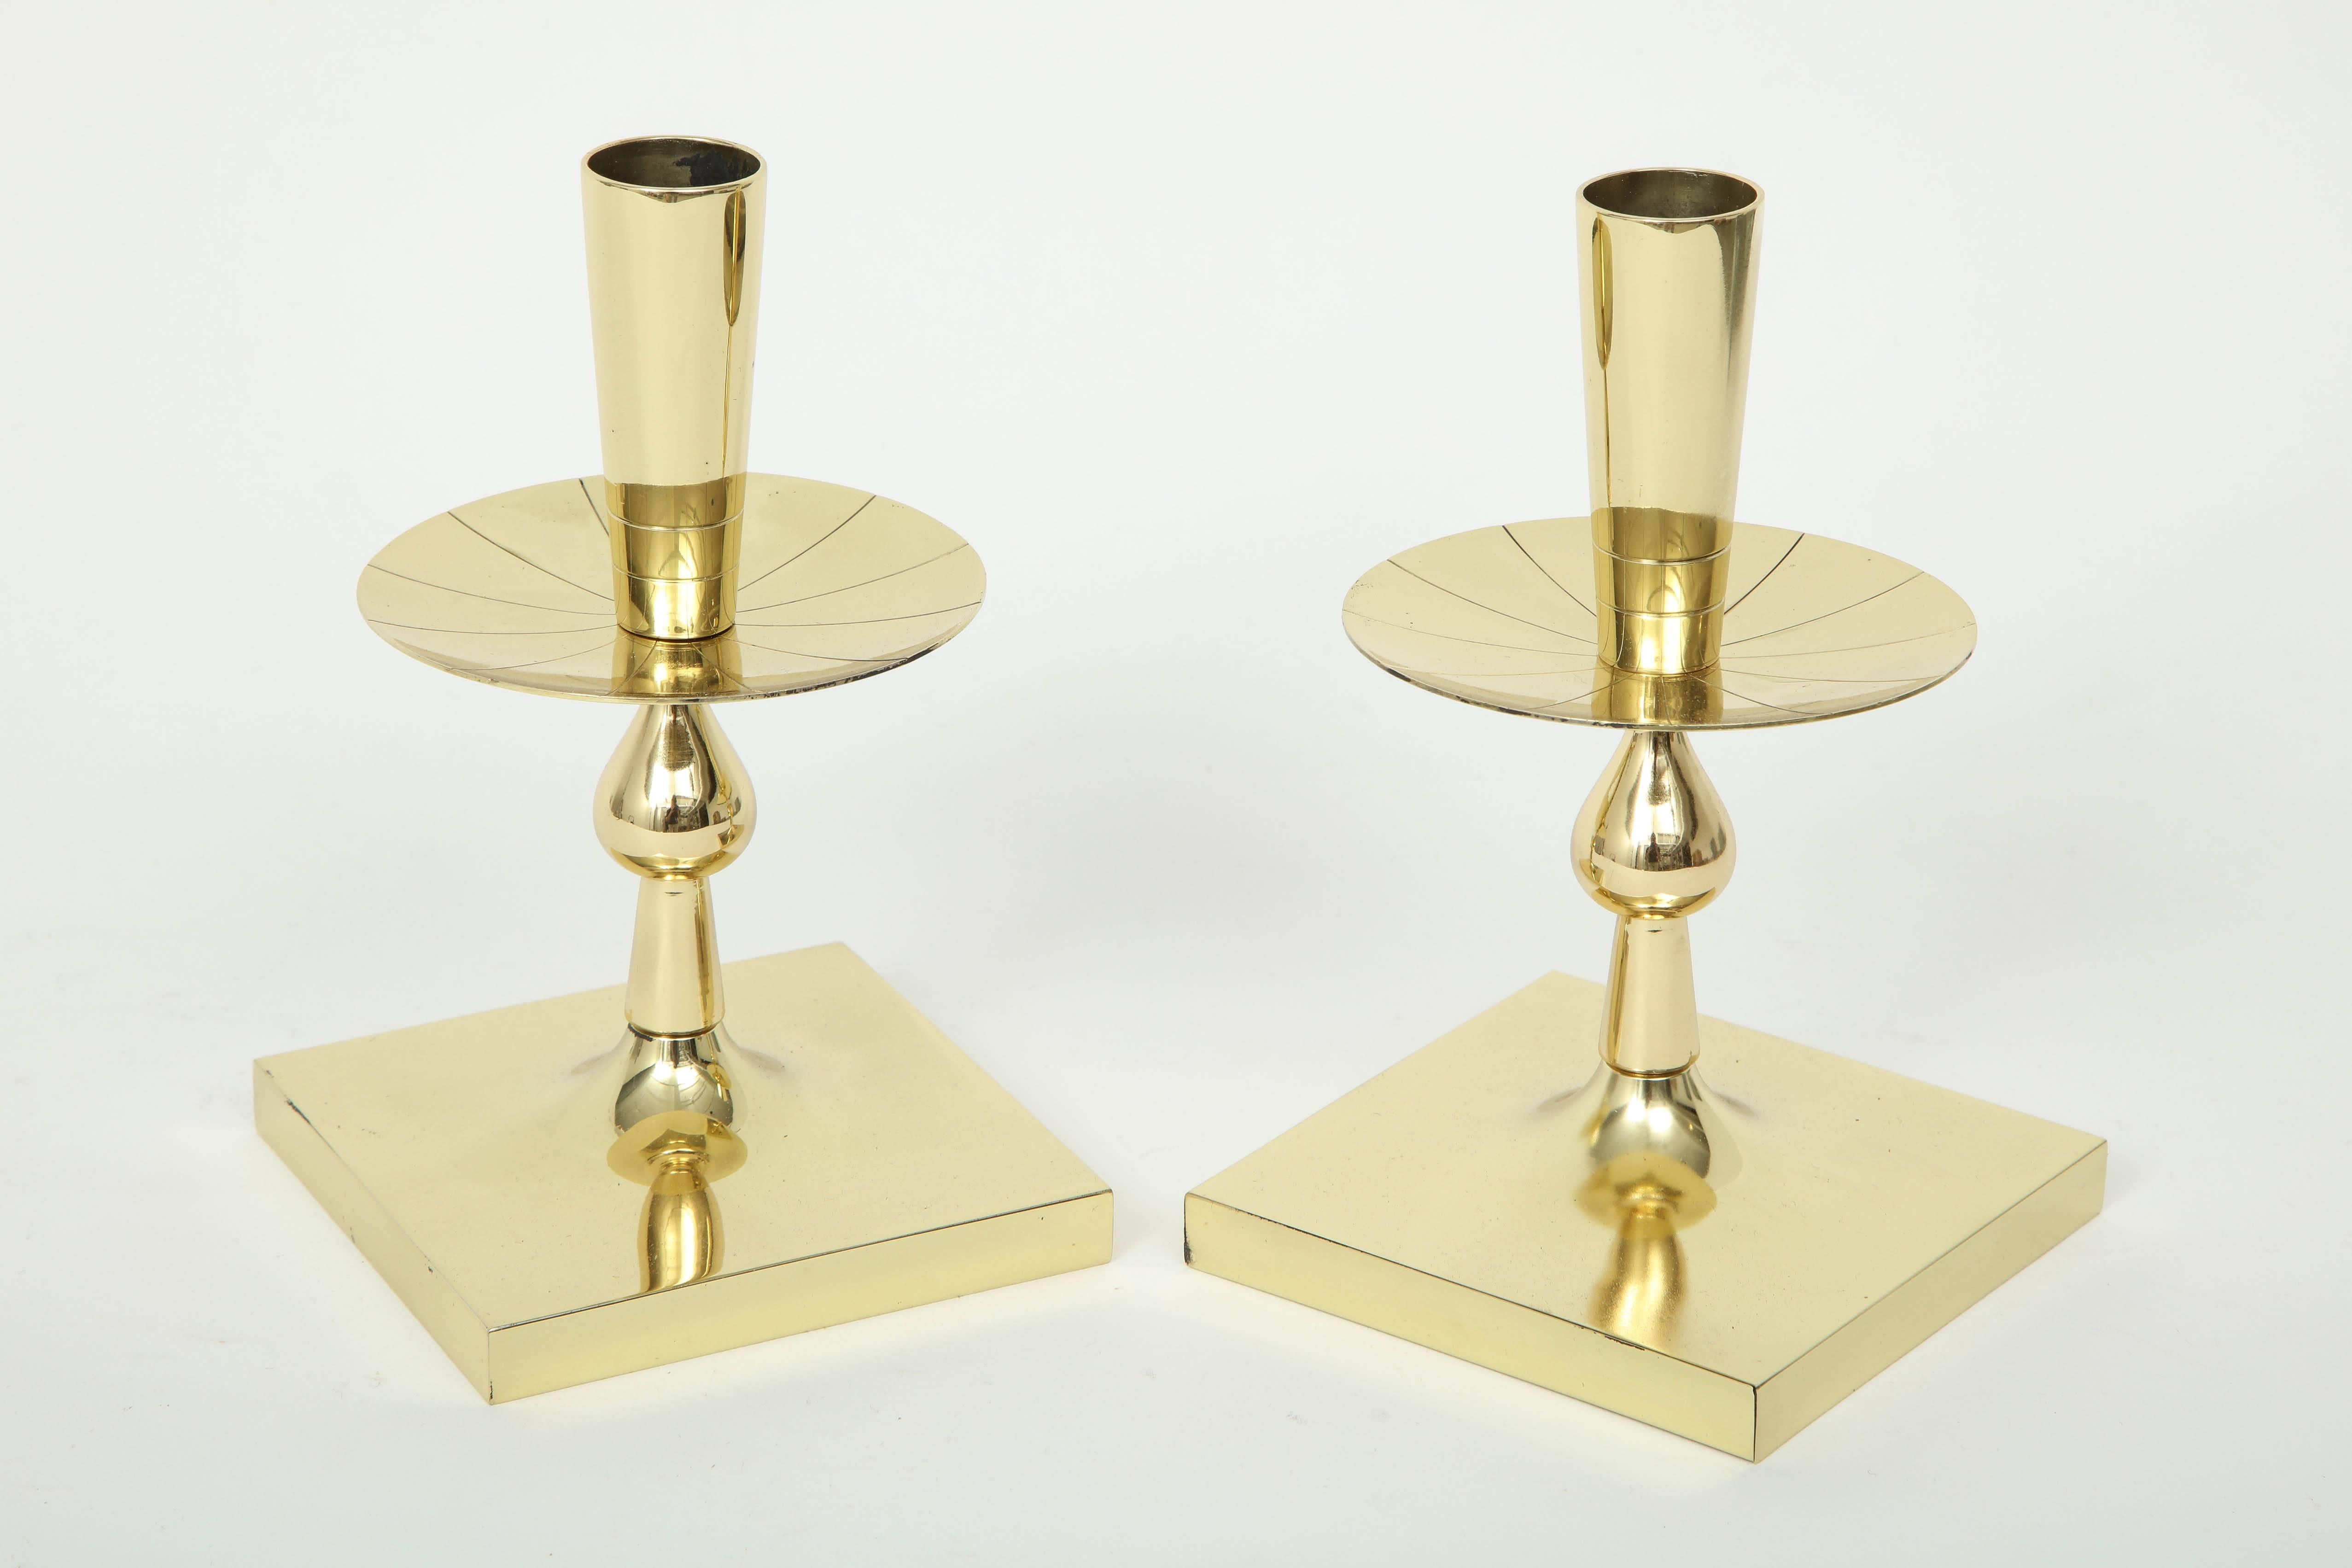 Pair of midcentury classically styled candlesticks with a square base stylized column and engraved drip plate. Designed by Tommi Parzinger, signature stamp on bottom. Polished.